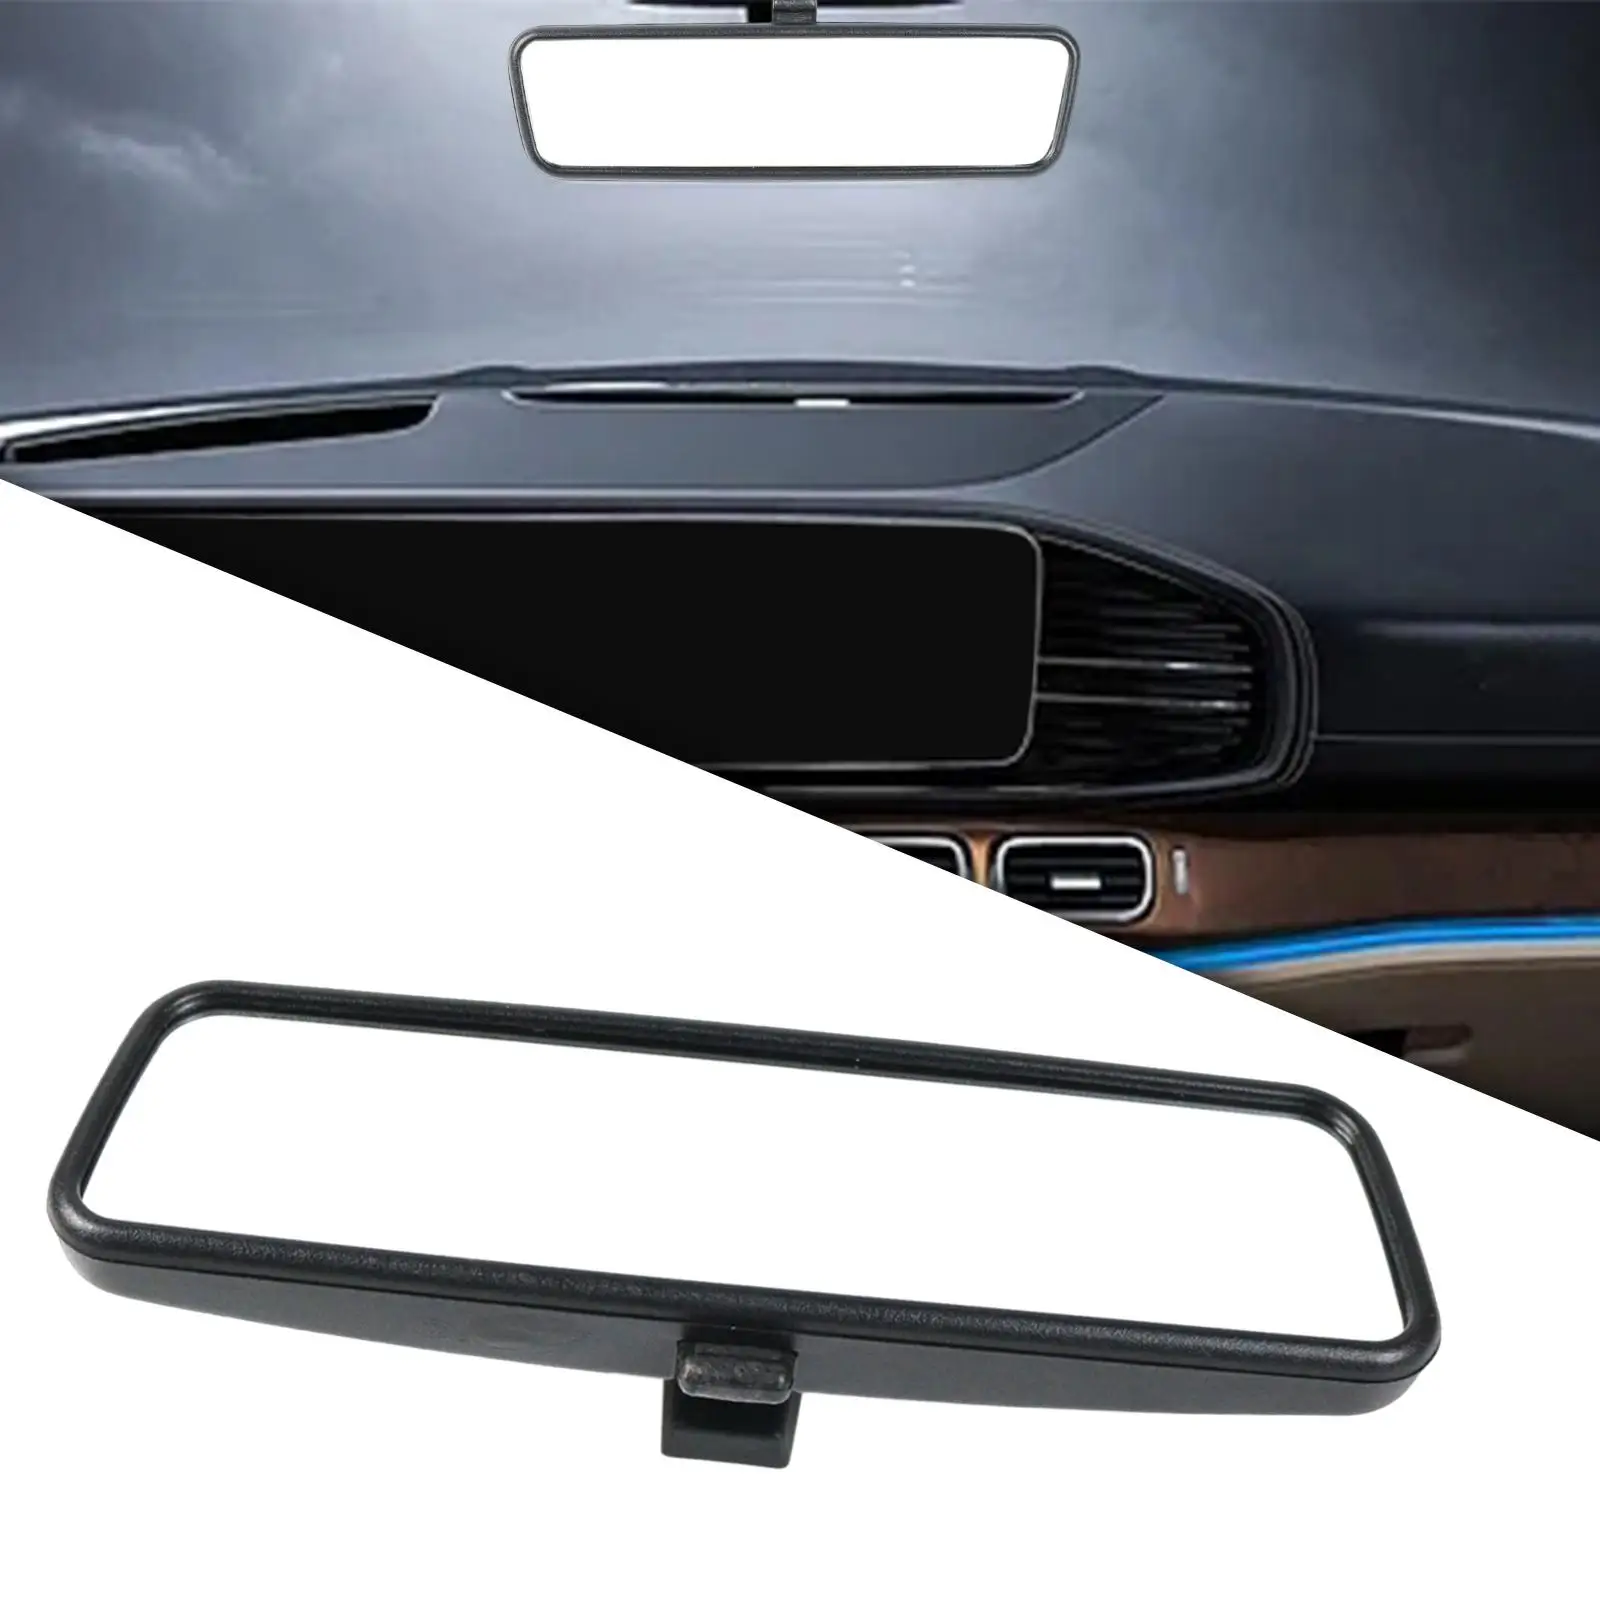 Interior Rear View Mirror 814842 Rearview Mirror for Renault Replaces Auto Accessories Automotive High Performance